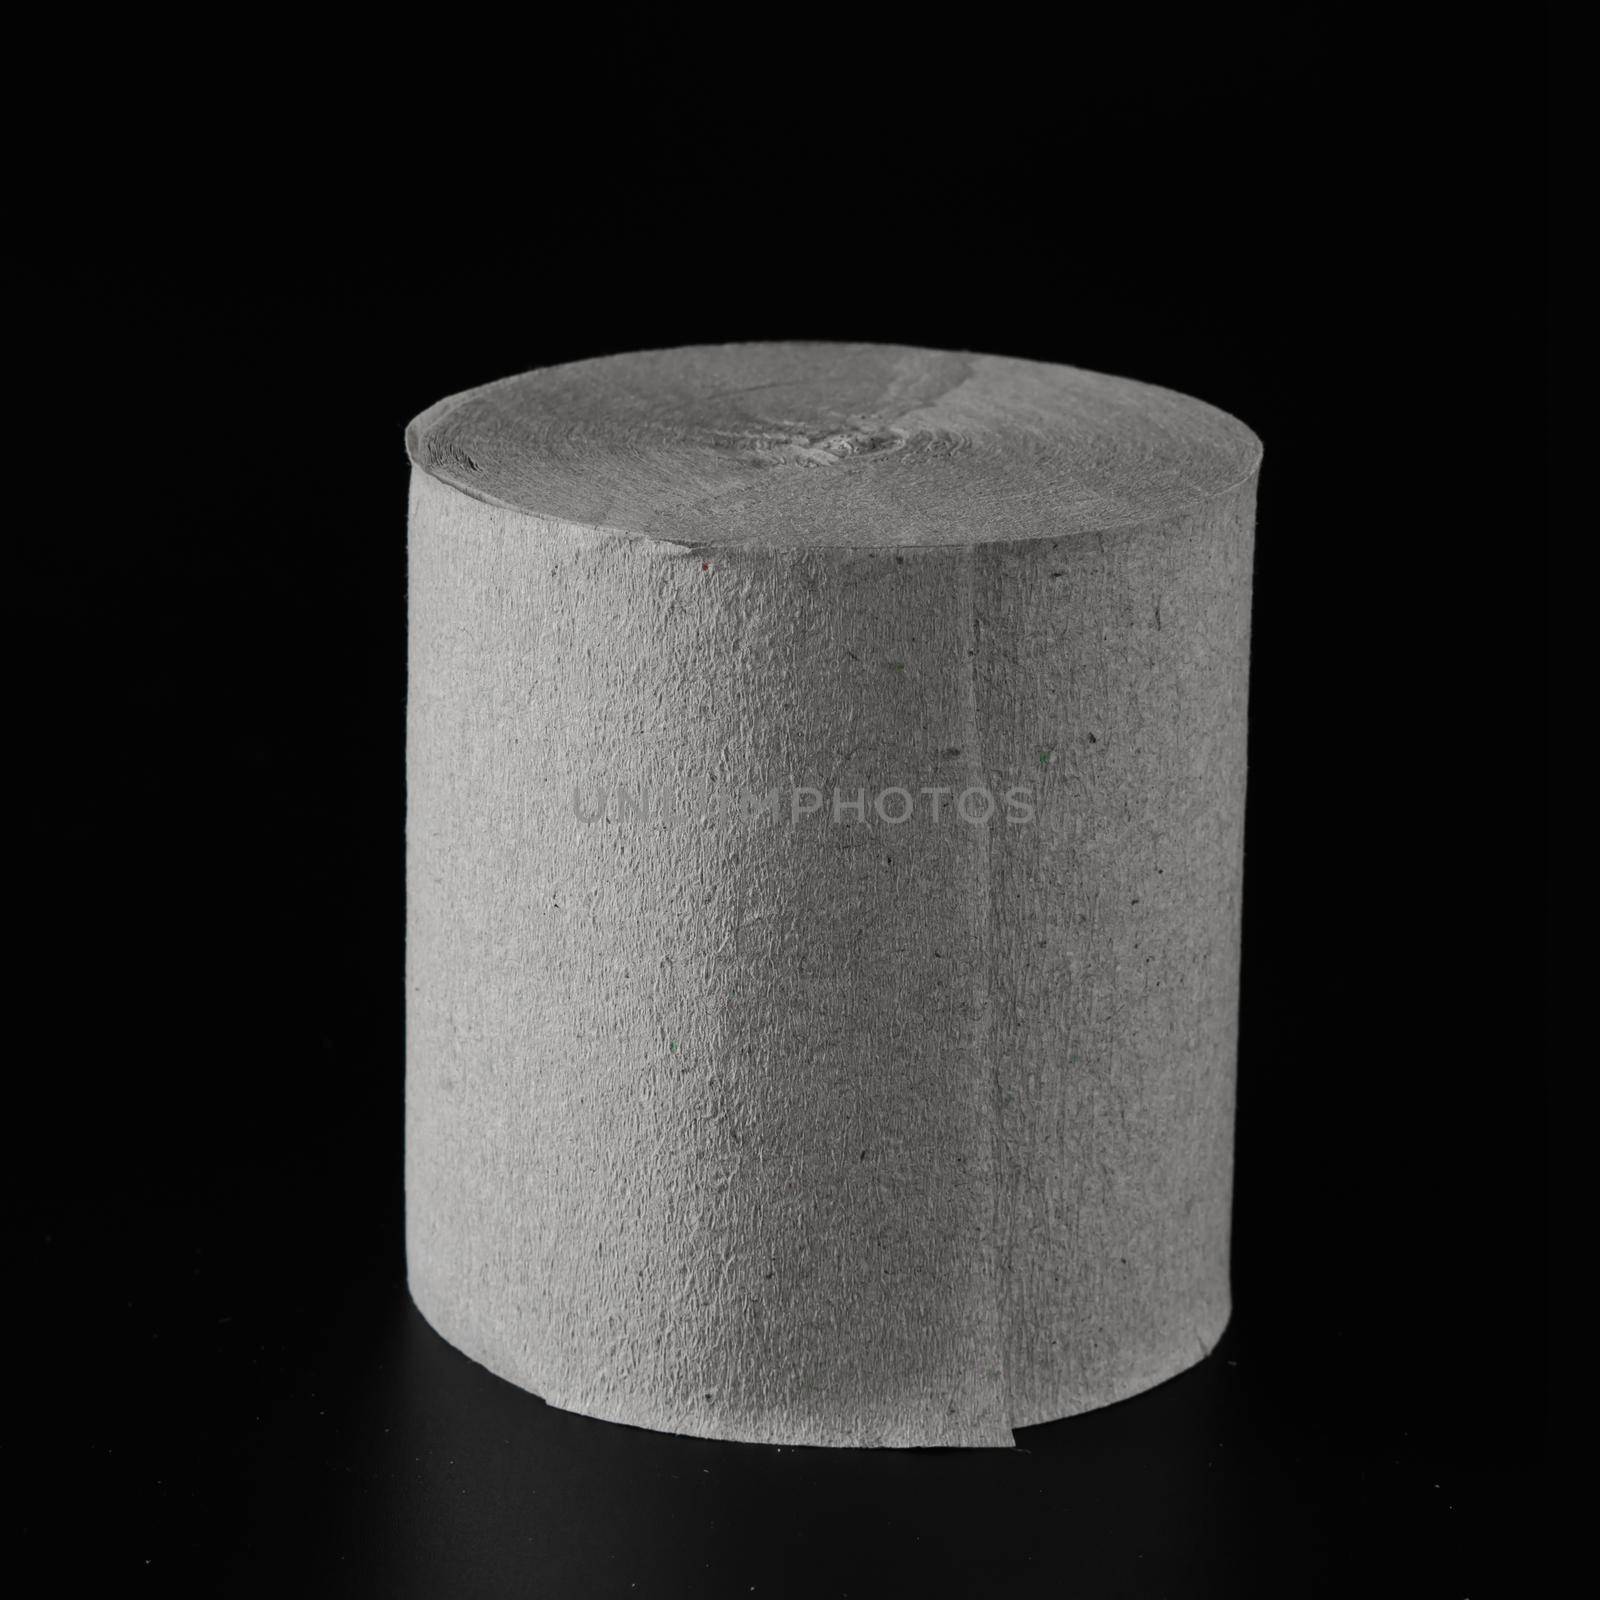 Roll of toilet paper, on black background isolated